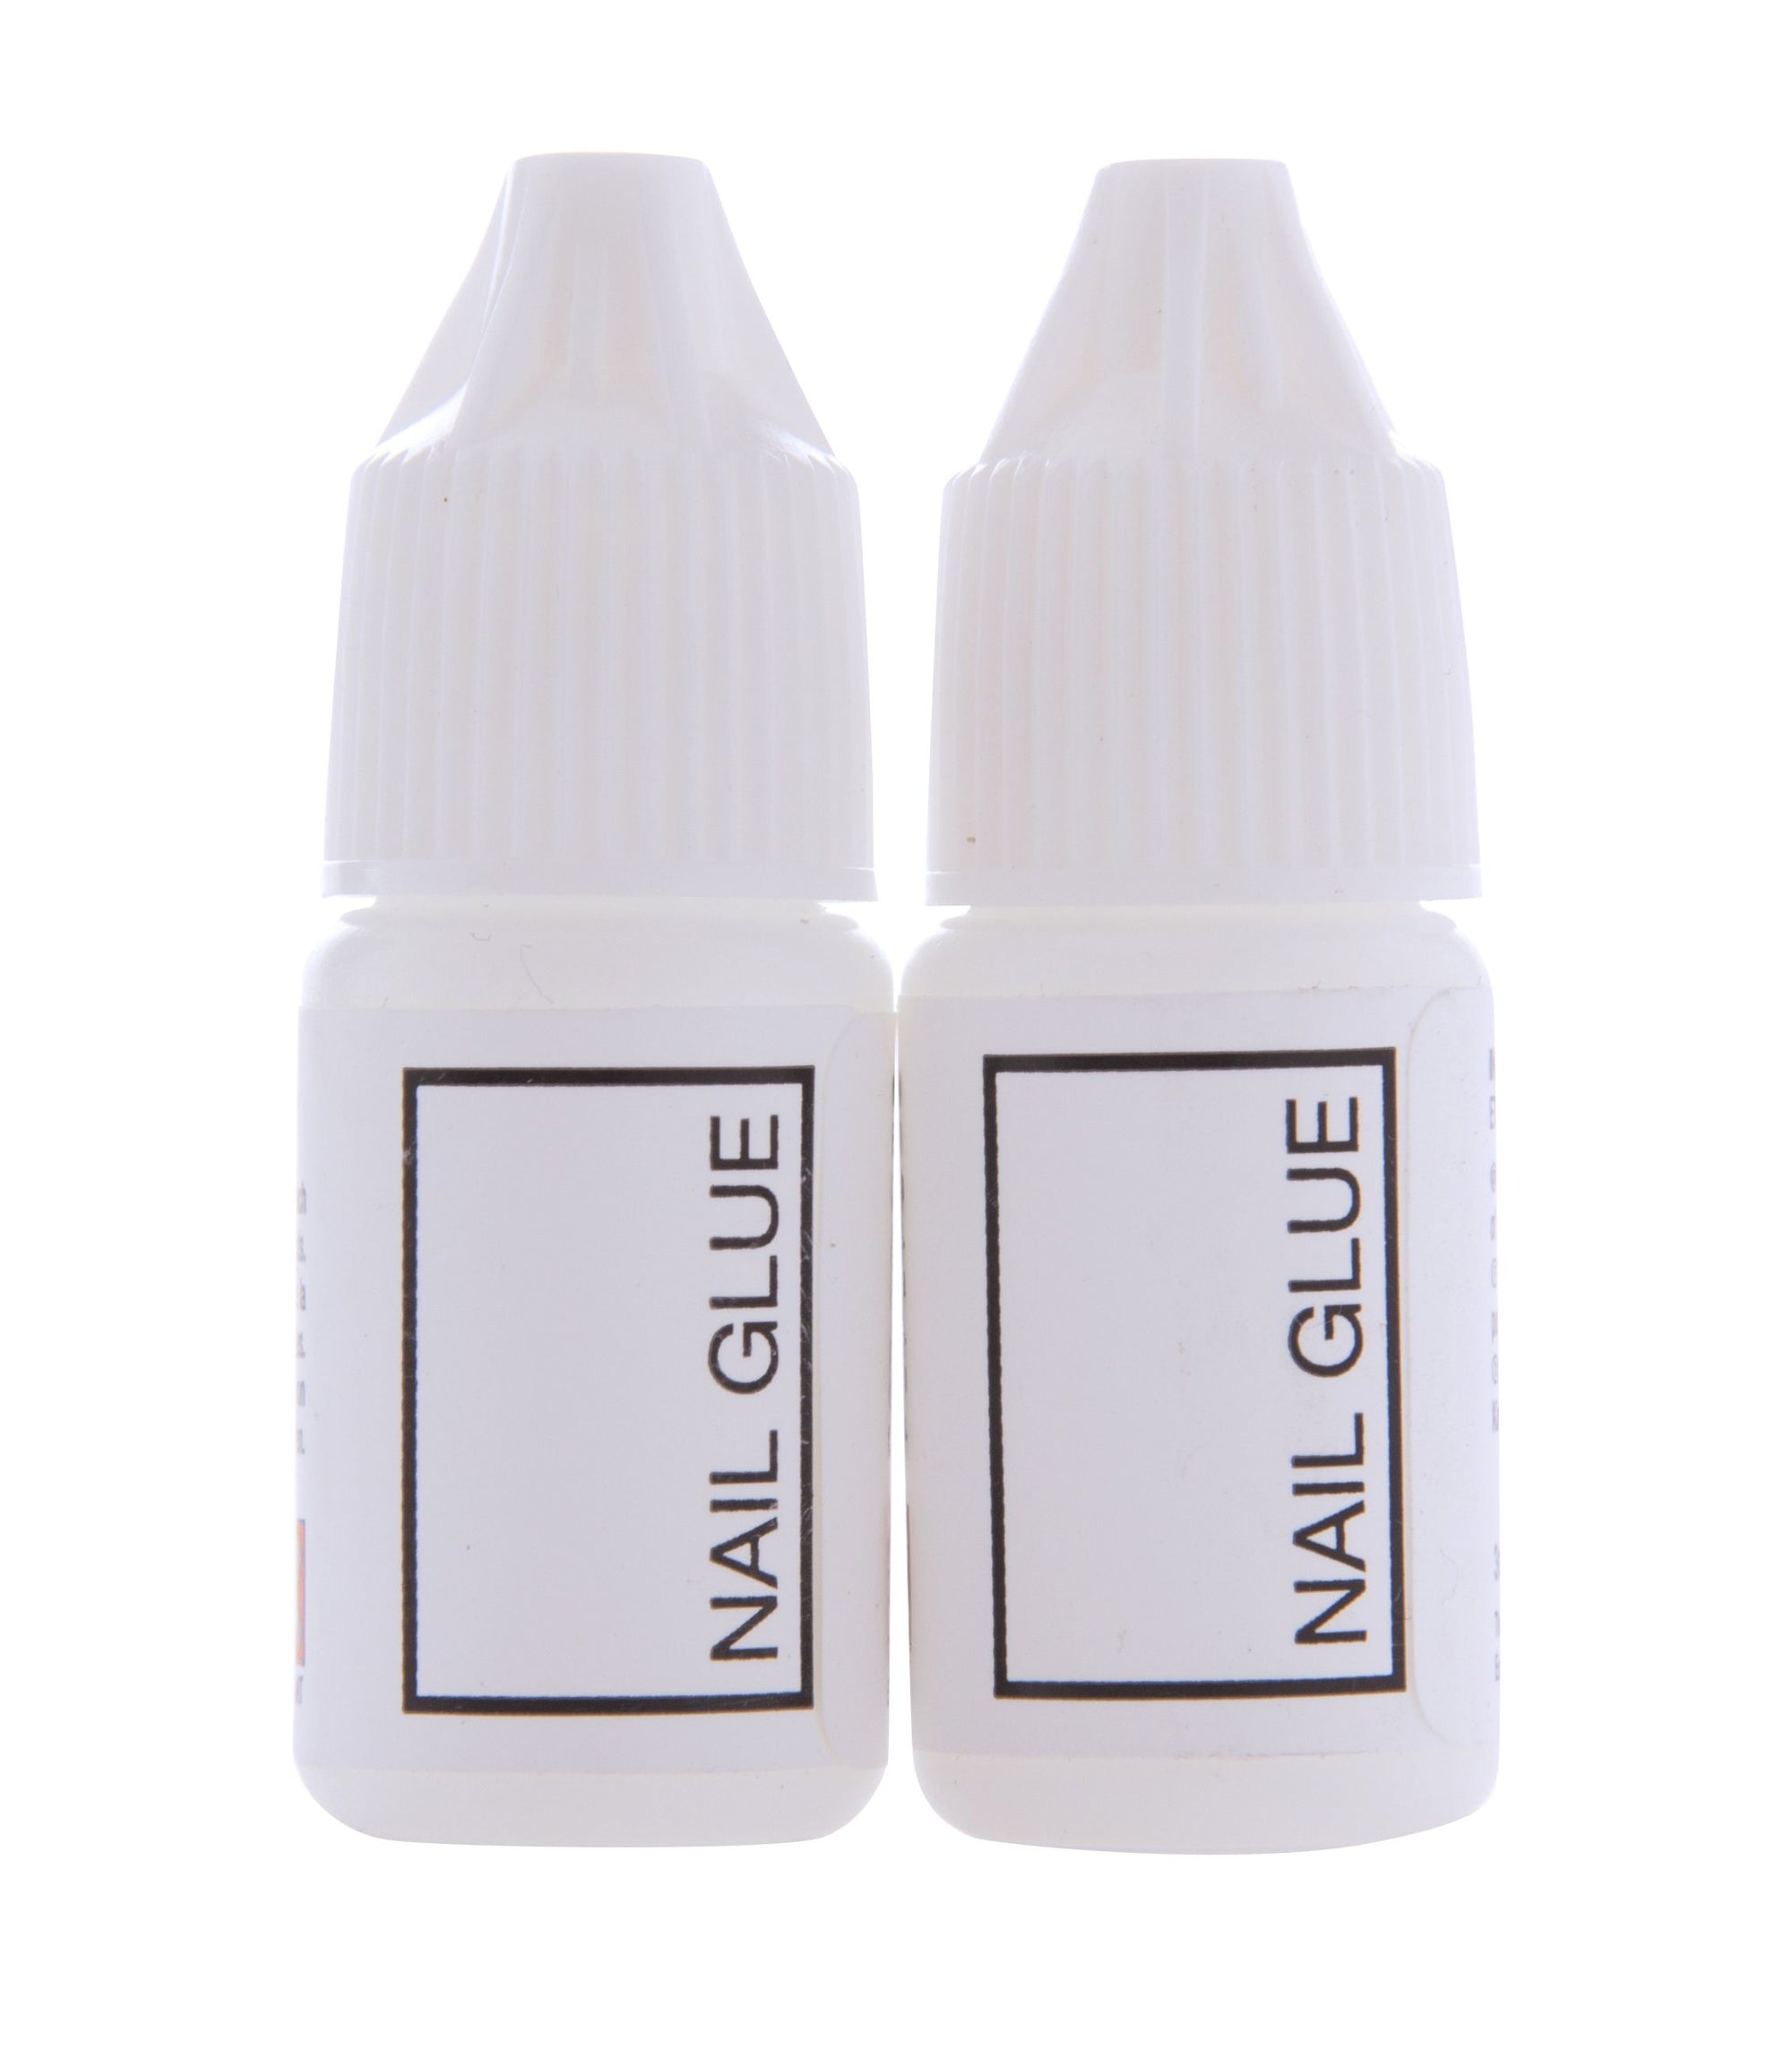 Two bottles of nail glue for false nails